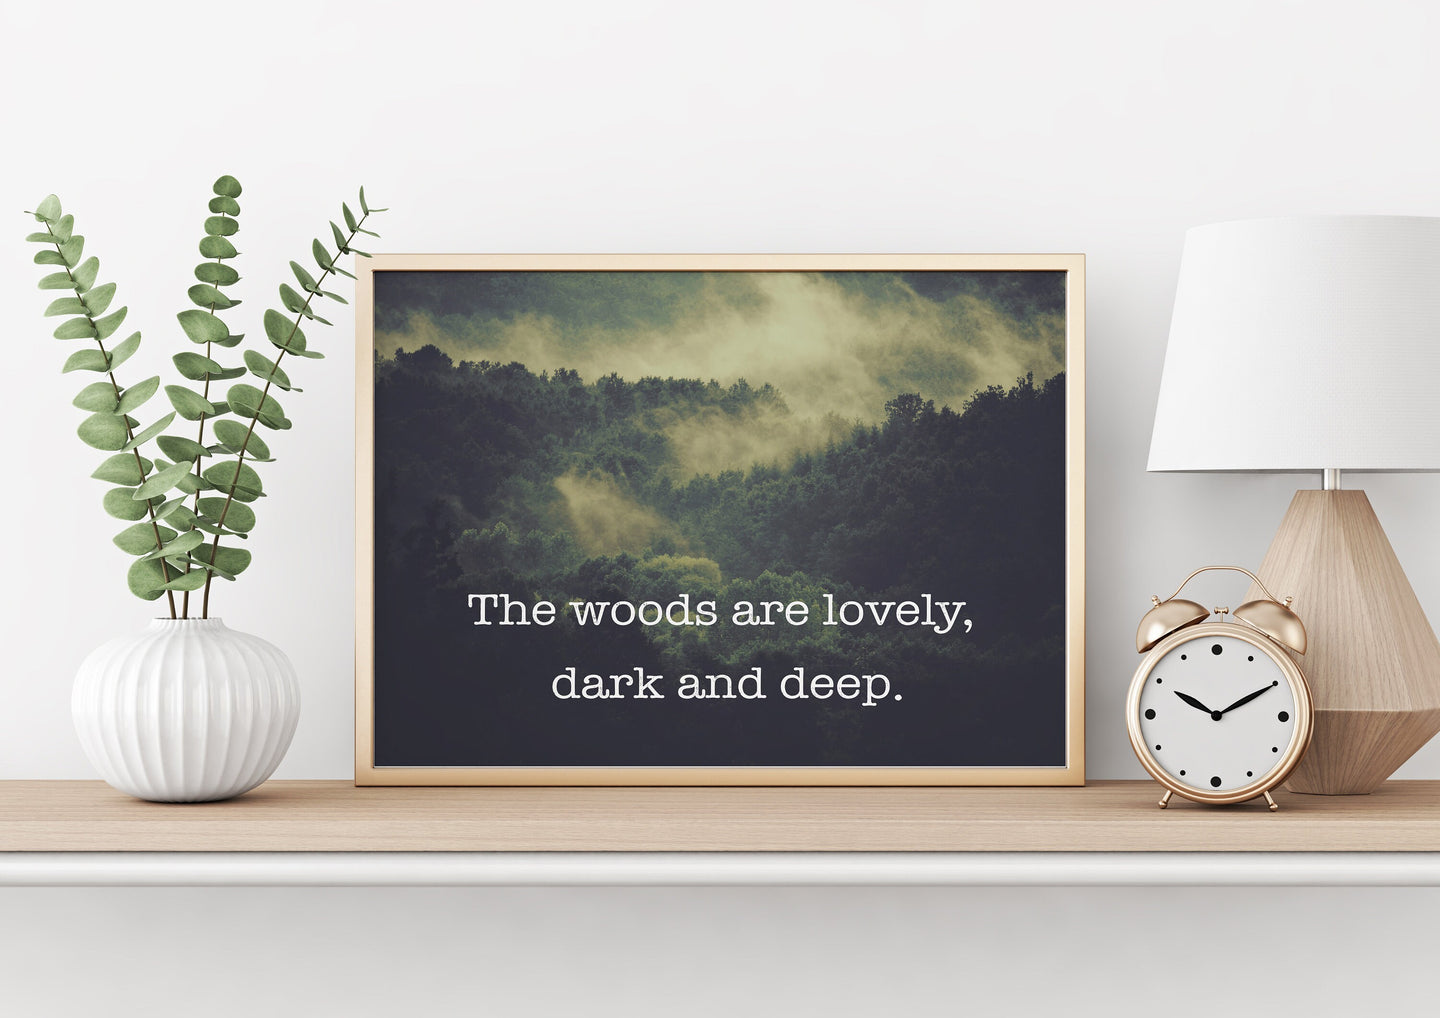 Robert Frost Print - The woods are lovely, dark and deep - Unframed print for Home, Office decor print Robert frost quote photography print